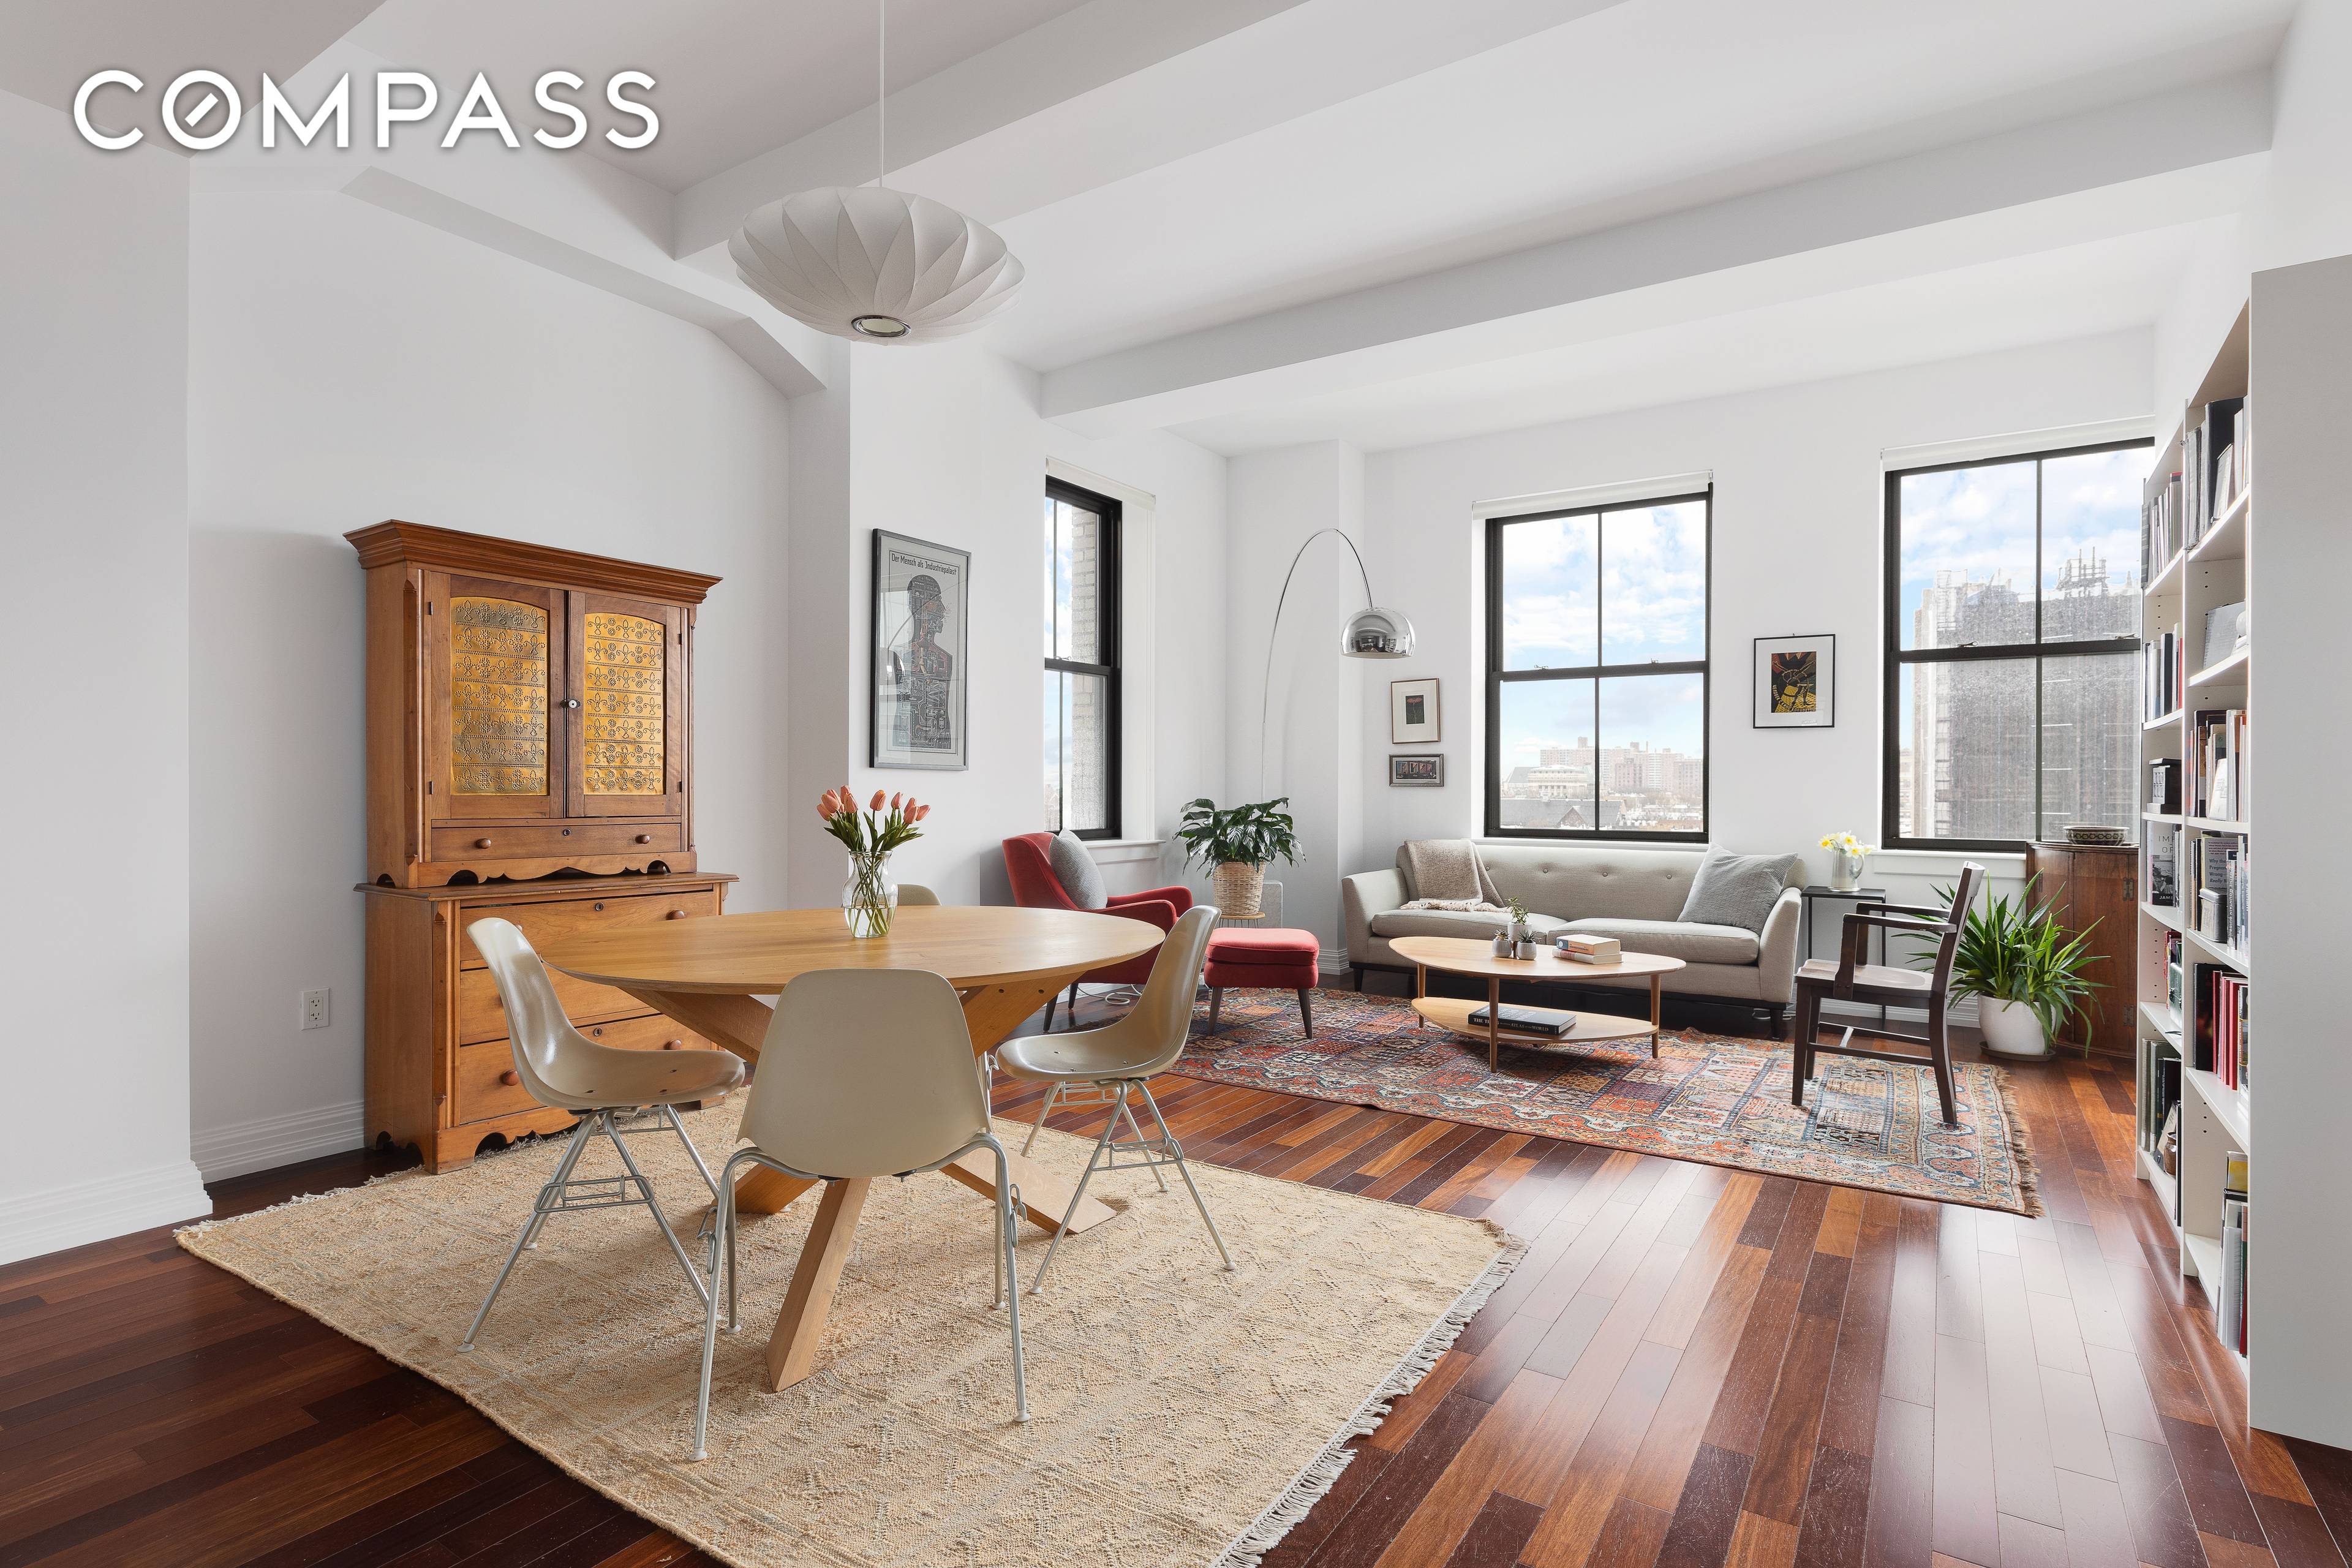 Located on the 10th floor offering excellent light and views of the historic district in Fort Greene.